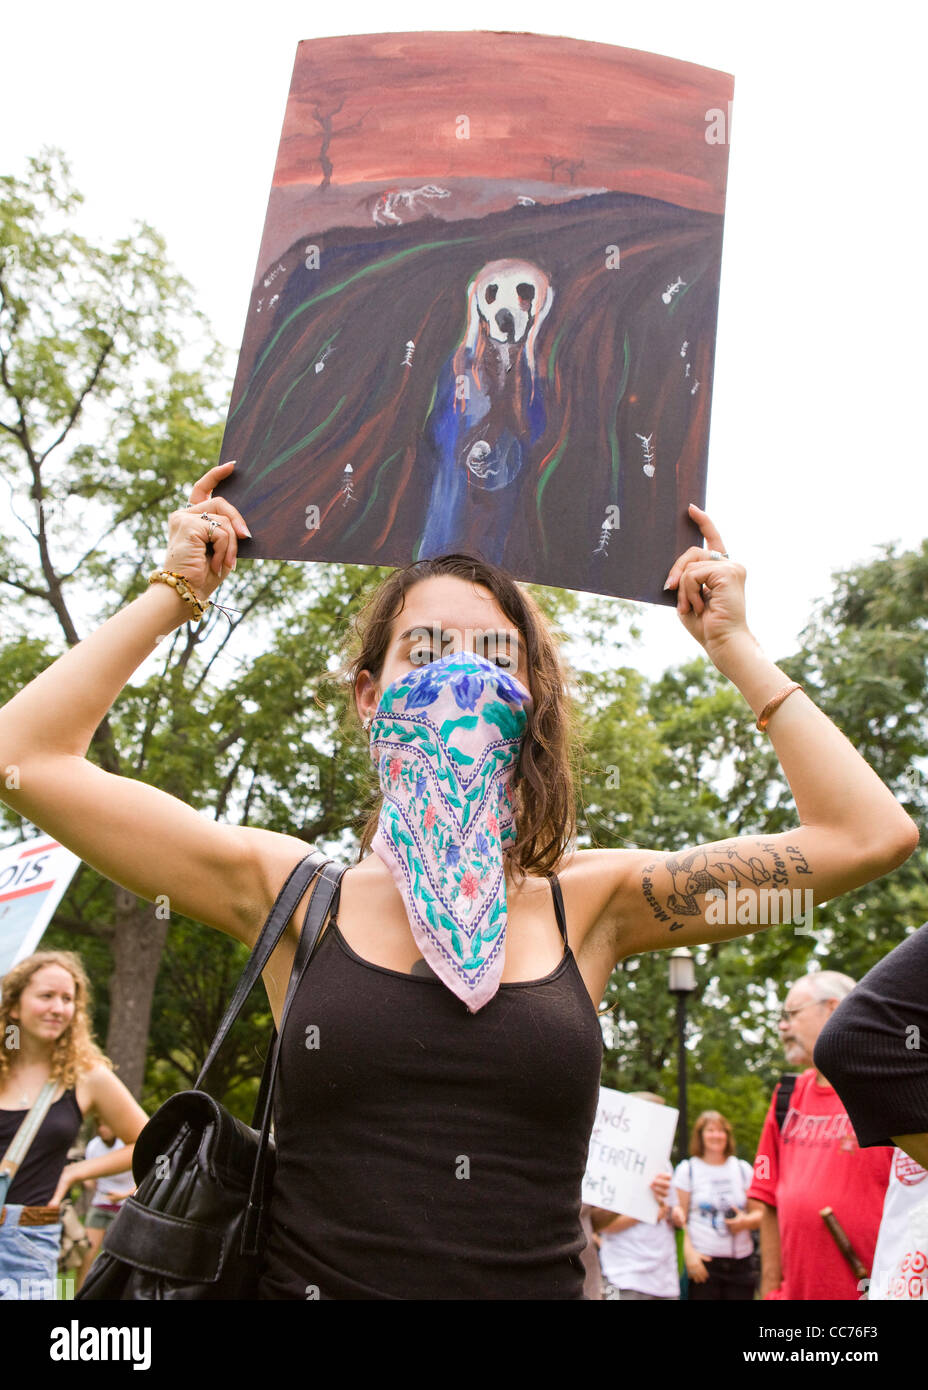 A young woman wearing a bandana mask and holding up The Scream painting during an environmental  protest (environmental activist) - Washington, DC USA Stock Photo